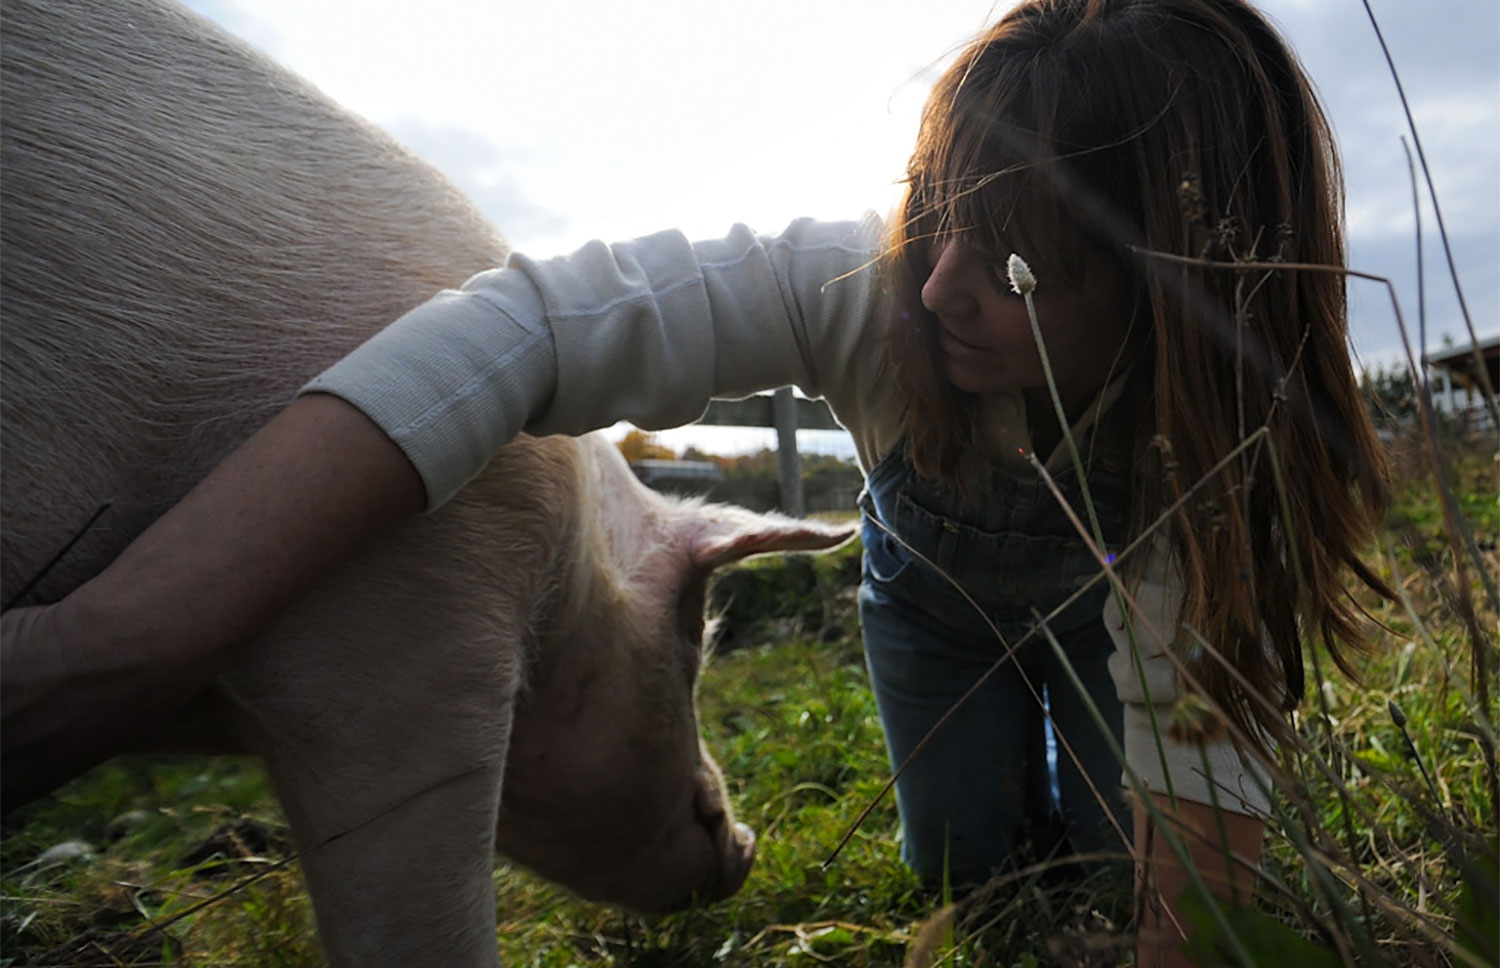 People Will Realize That Farm Animals Are No Different Than Their Pets